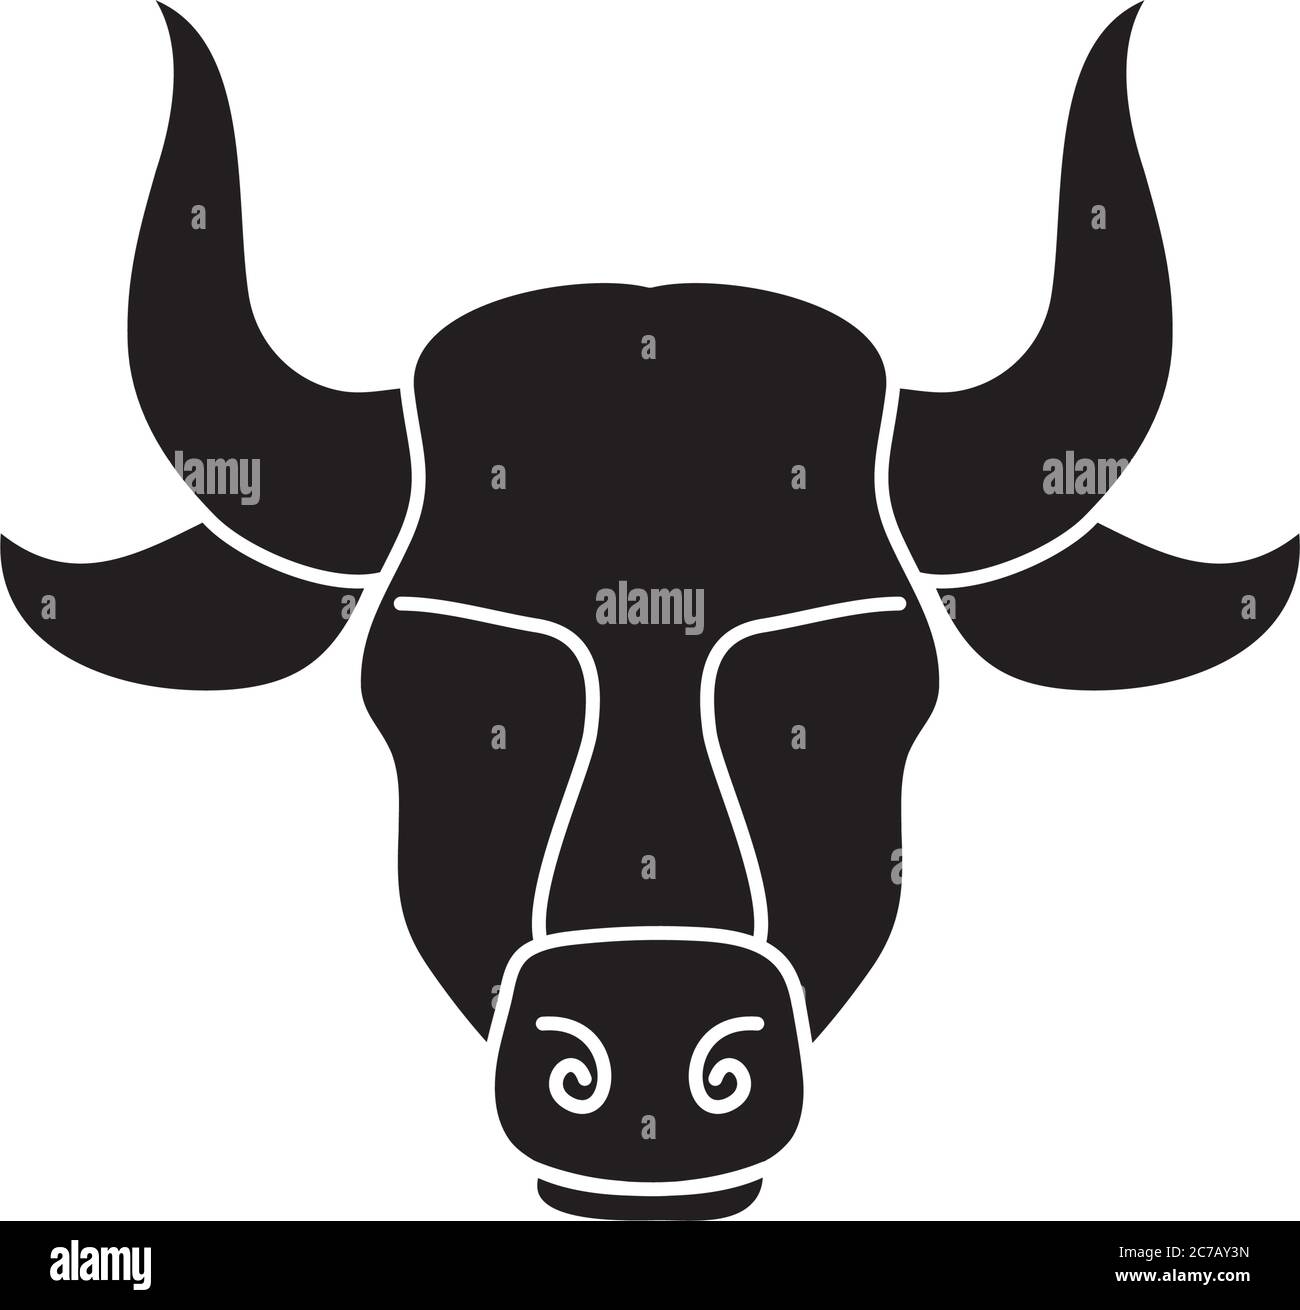 astrology concept, taurus sign, the bull symbol icon over white ...